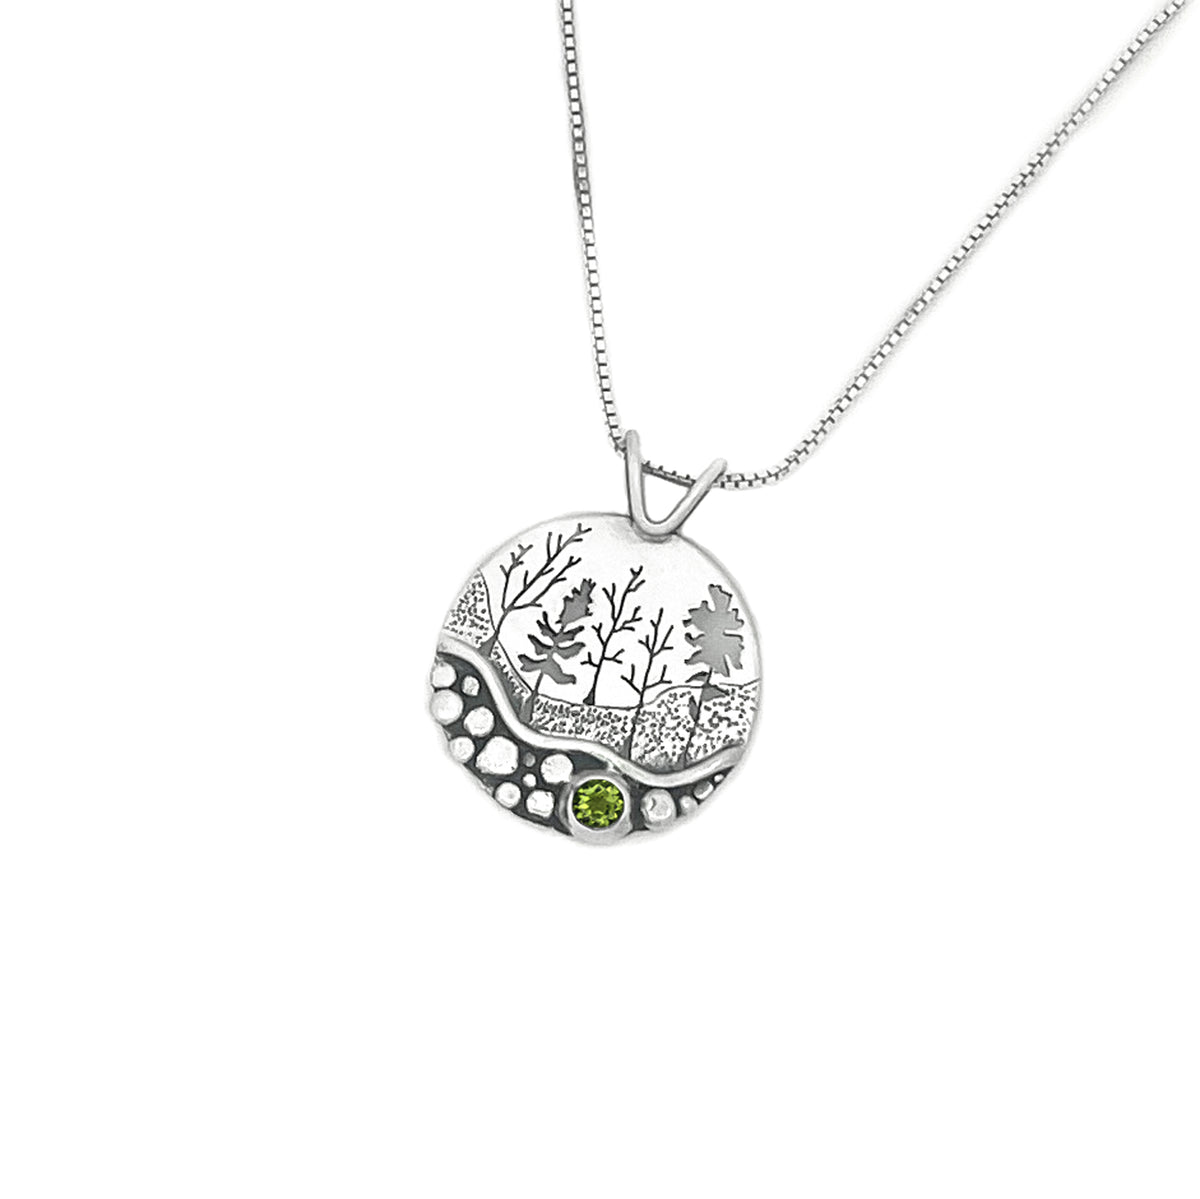 Silver Pebble Forest Birthstone Pendant - your choice of 4mm stone - Silver Pendant August - Arizona Peridot December - Sky Blue Topaz 7257 - handmade by Beth Millner Jewelry